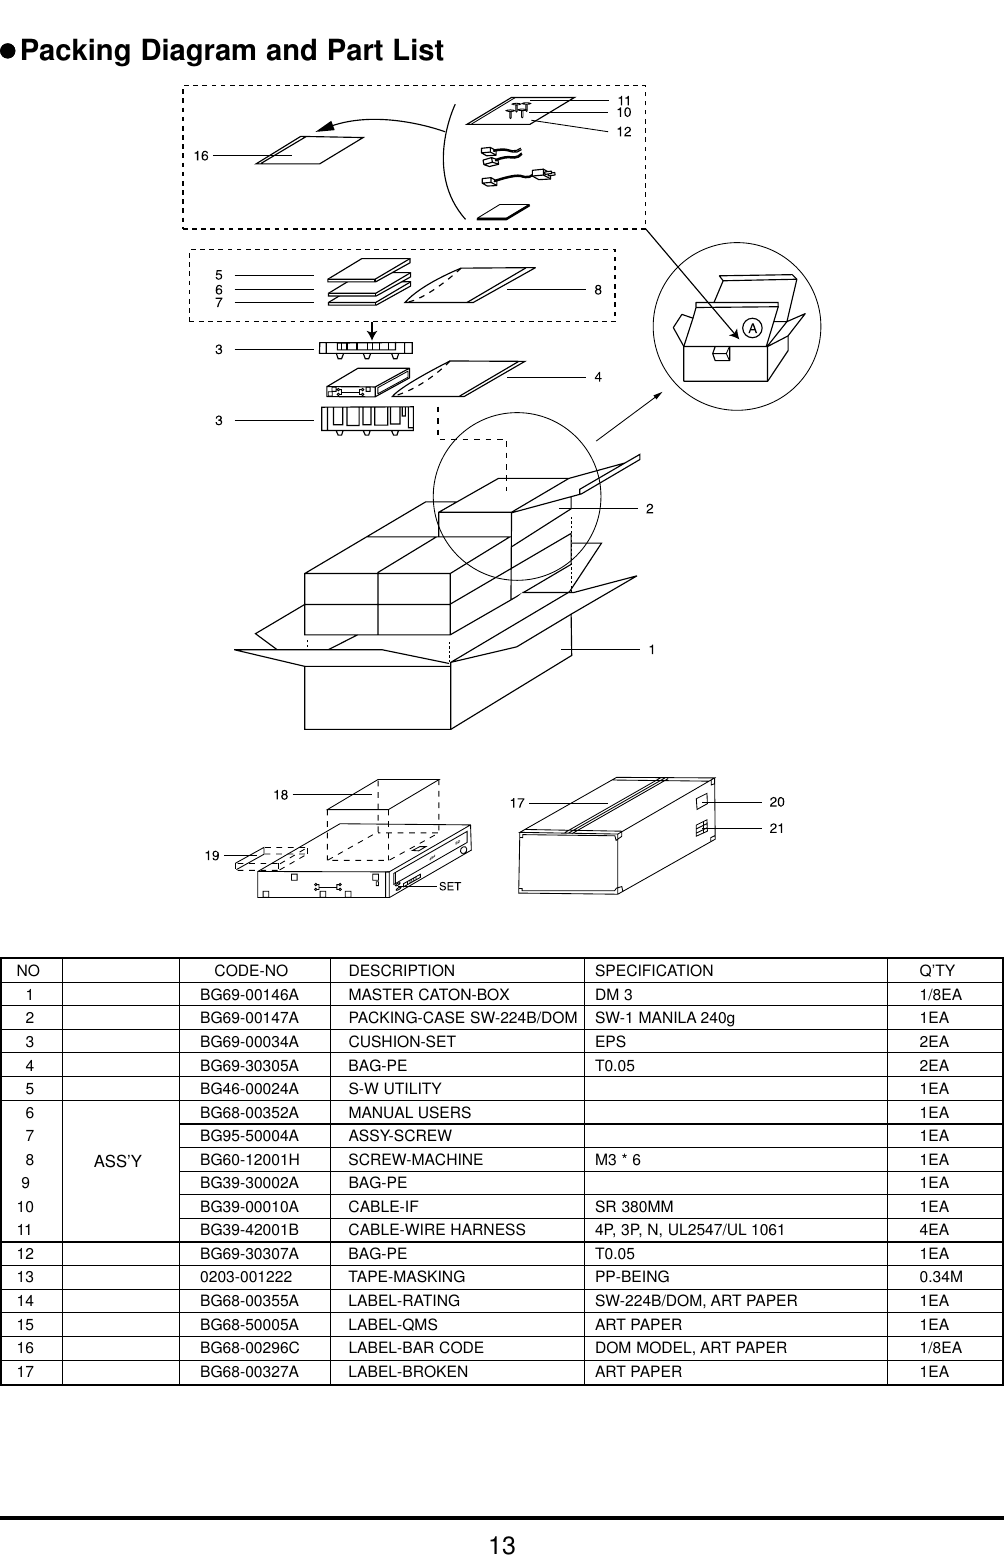 13Packing Diagram and Part ListNO CODE-NO DESCRIPTION SPECIFICATION Q’TY1 BG69-00146A MASTER CATON-BOX DM 3 1/8EA2 BG69-00147A PACKING-CASE SW-224B/DOM SW-1 MANILA 240g 1EA3 BG69-00034A CUSHION-SET EPS 2EA4 BG69-30305A BAG-PE T0.05 2EA5 BG46-00024A S-W UTILITY 1EA6 BG68-00352A MANUAL USERS 1EA7 BG95-50004A ASSY-SCREW 1EA8 BG60-12001H SCREW-MACHINE M3 * 6 1EA9 BG39-30002A BAG-PE 1EA10 BG39-00010A CABLE-IF SR 380MM 1EA11 BG39-42001B CABLE-WIRE HARNESS 4P, 3P, N, UL2547/UL 1061 4EA12 BG69-30307A BAG-PE T0.05 1EA13 0203-001222 TAPE-MASKING PP-BEING 0.34M14 BG68-00355A LABEL-RATING SW-224B/DOM, ART PAPER 1EA15 BG68-50005A LABEL-QMS ART PAPER 1EA16 BG68-00296C LABEL-BAR CODE DOM MODEL, ART PAPER 1/8EA17 BG68-00327A LABEL-BROKEN ART PAPER 1EAASS’Y